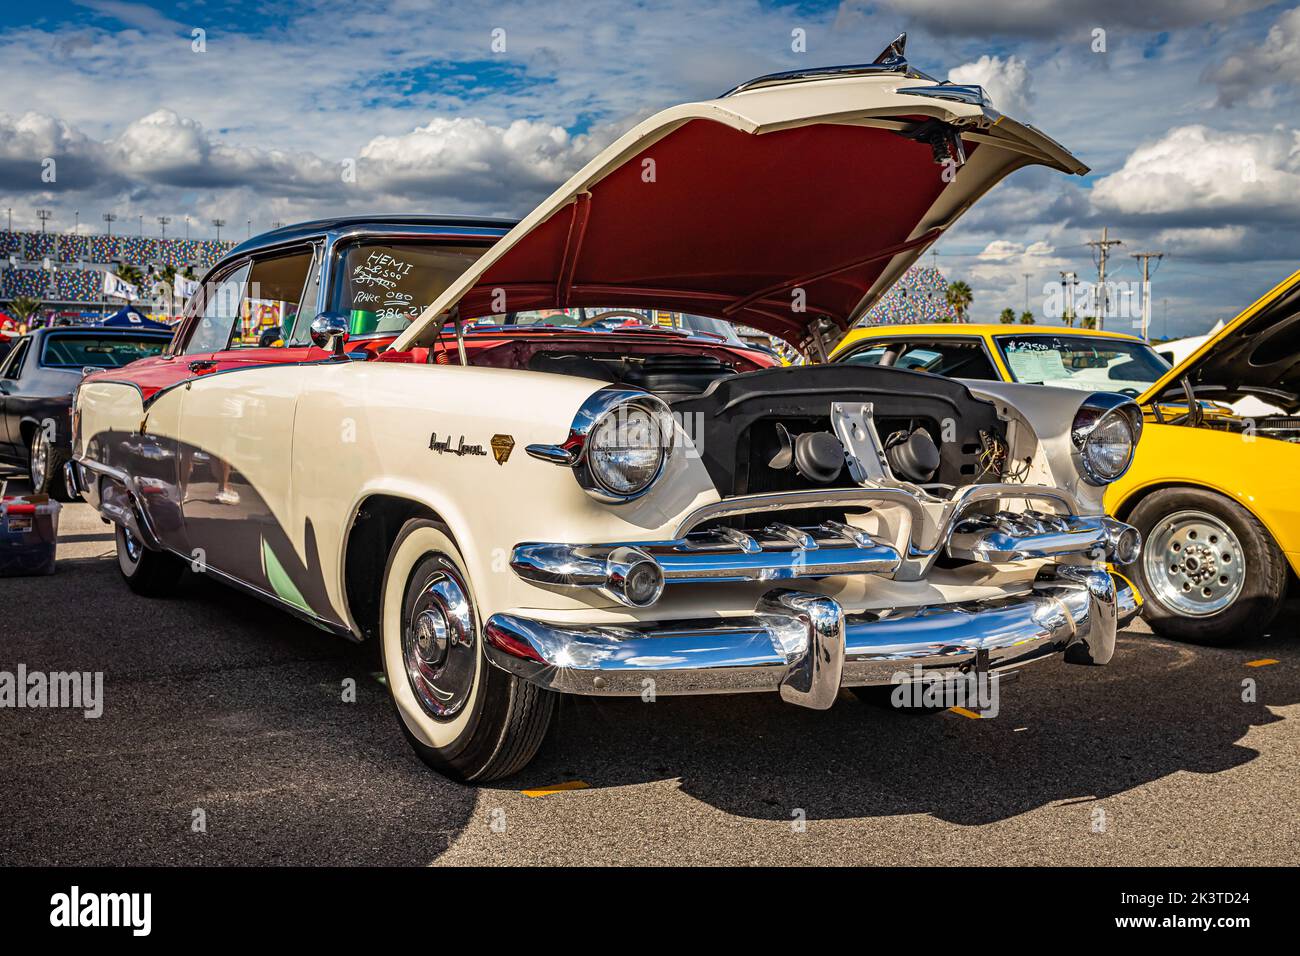 Daytona Beach, FL - November 28, 2020: Low perspective front corner view of a 1955 Dodge Custom Royal Lancer Hardtop Coupe at a local car show. Stock Photo